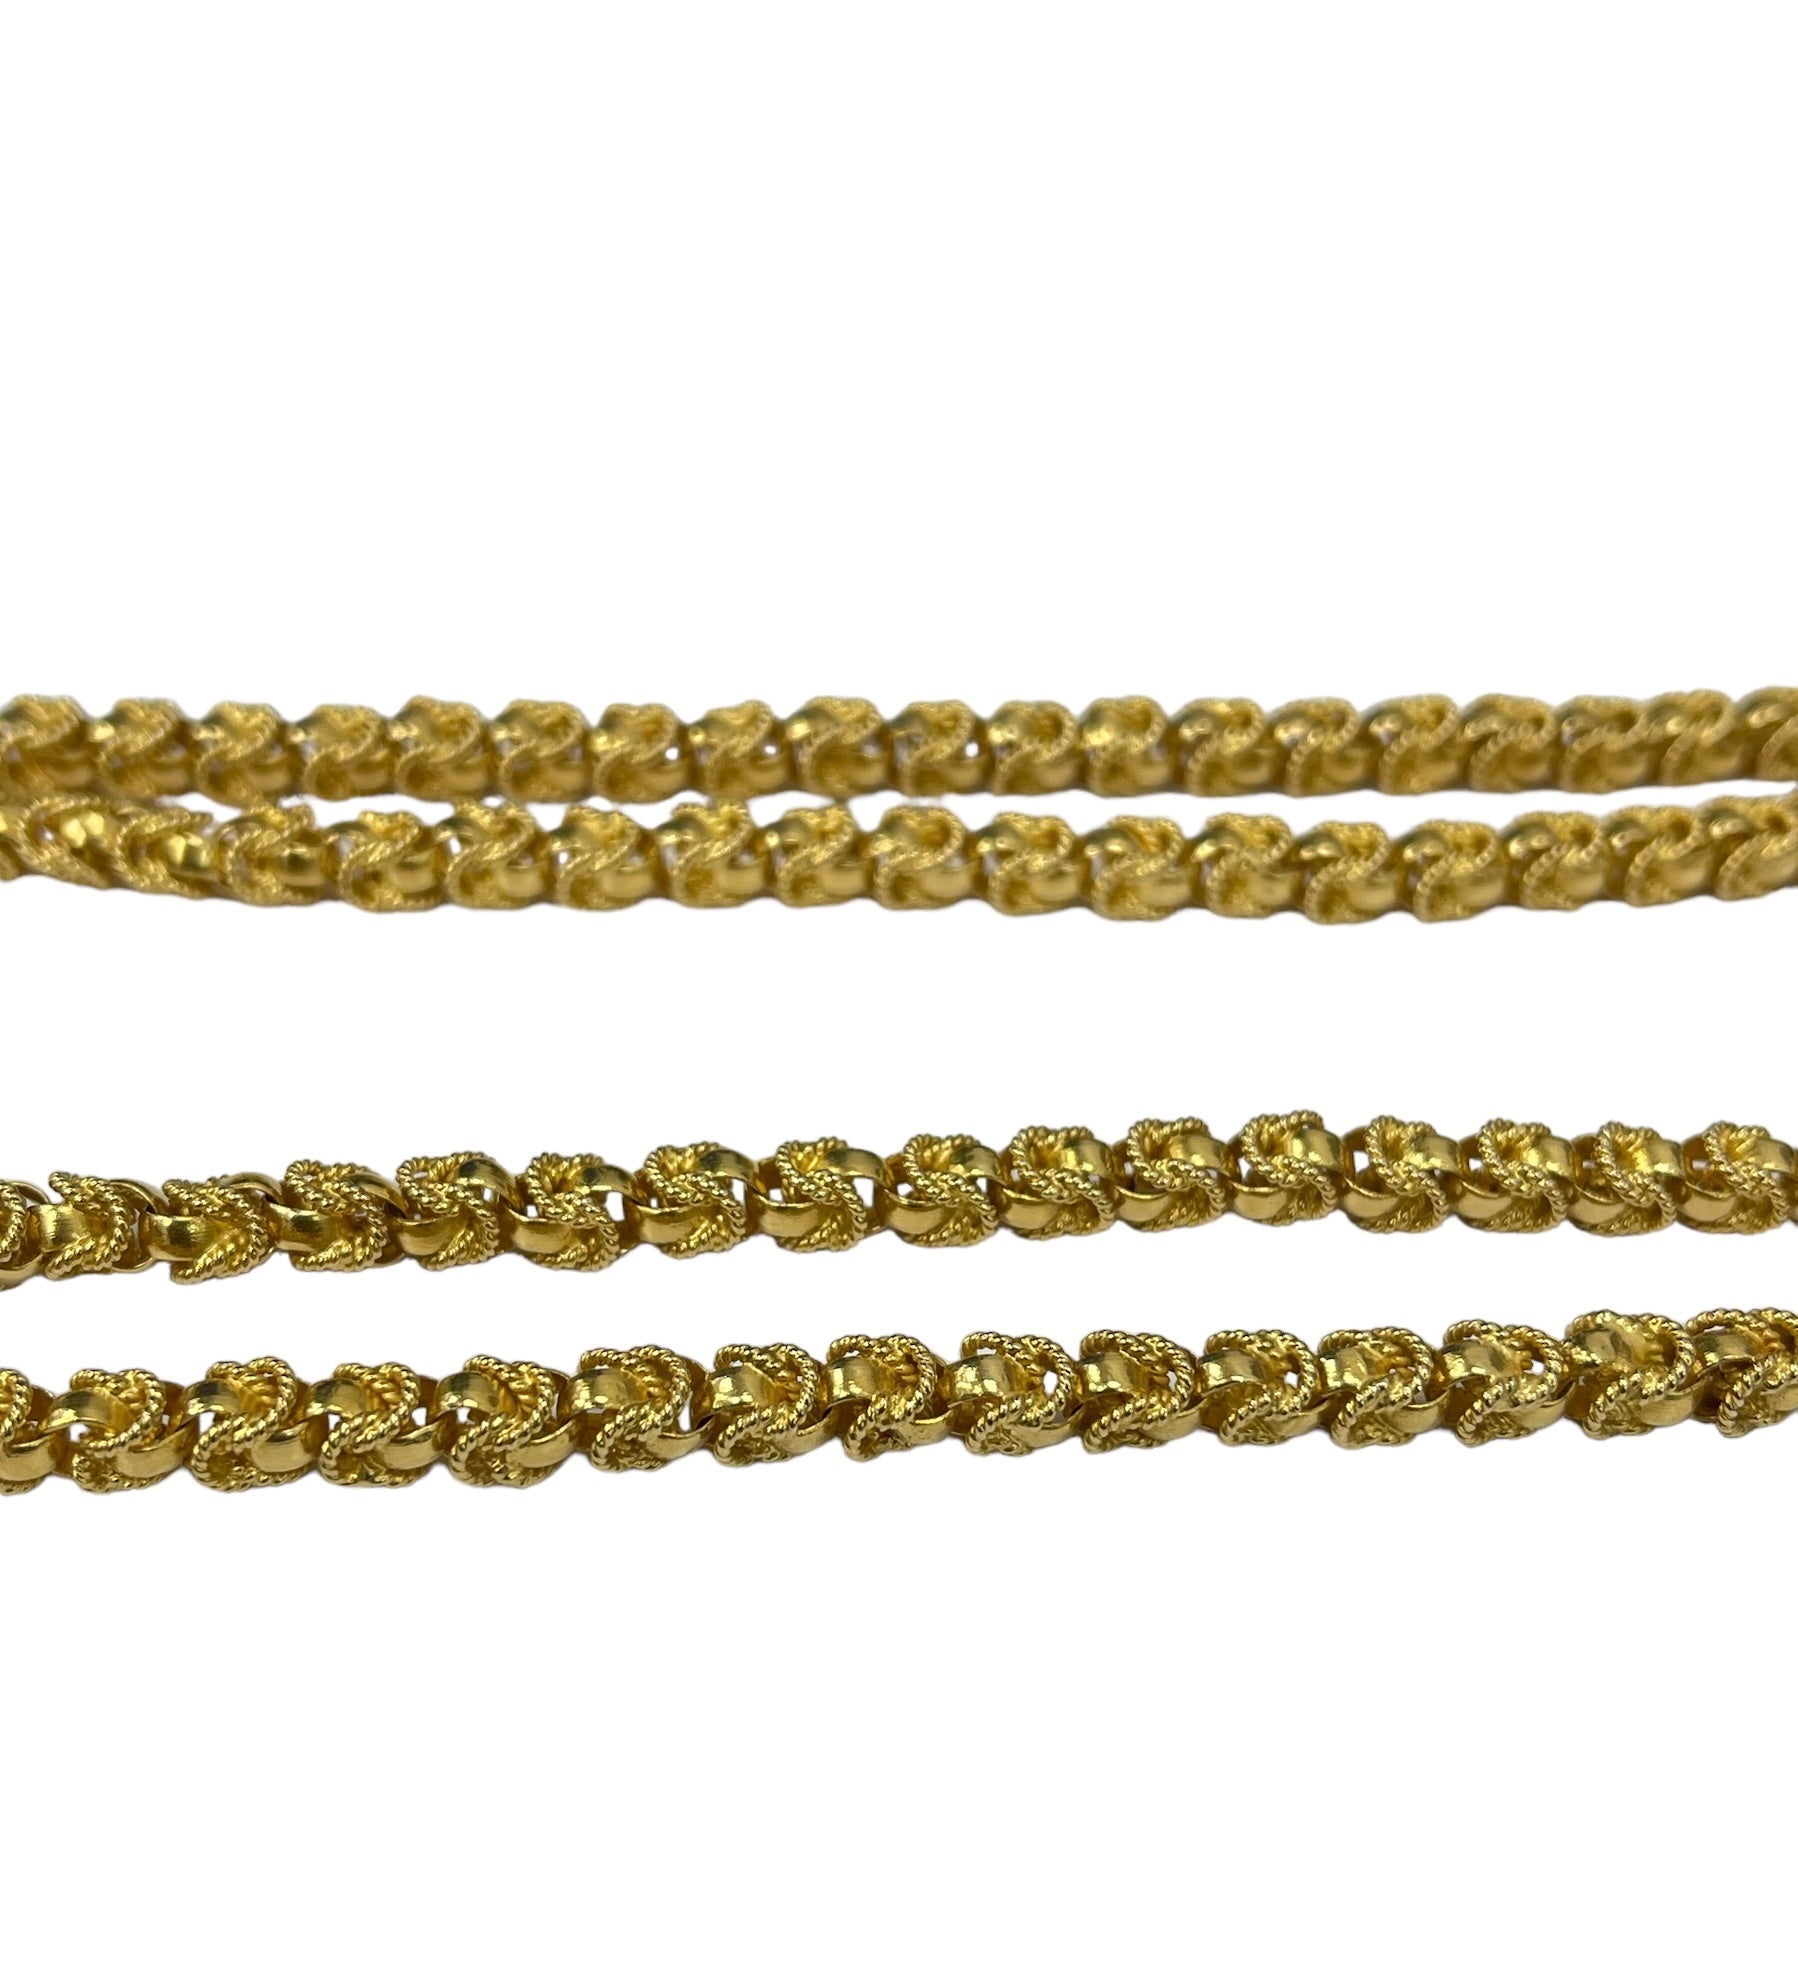 Flower Bud Yellow Gold Necklace Chain 34" Solid 18kt